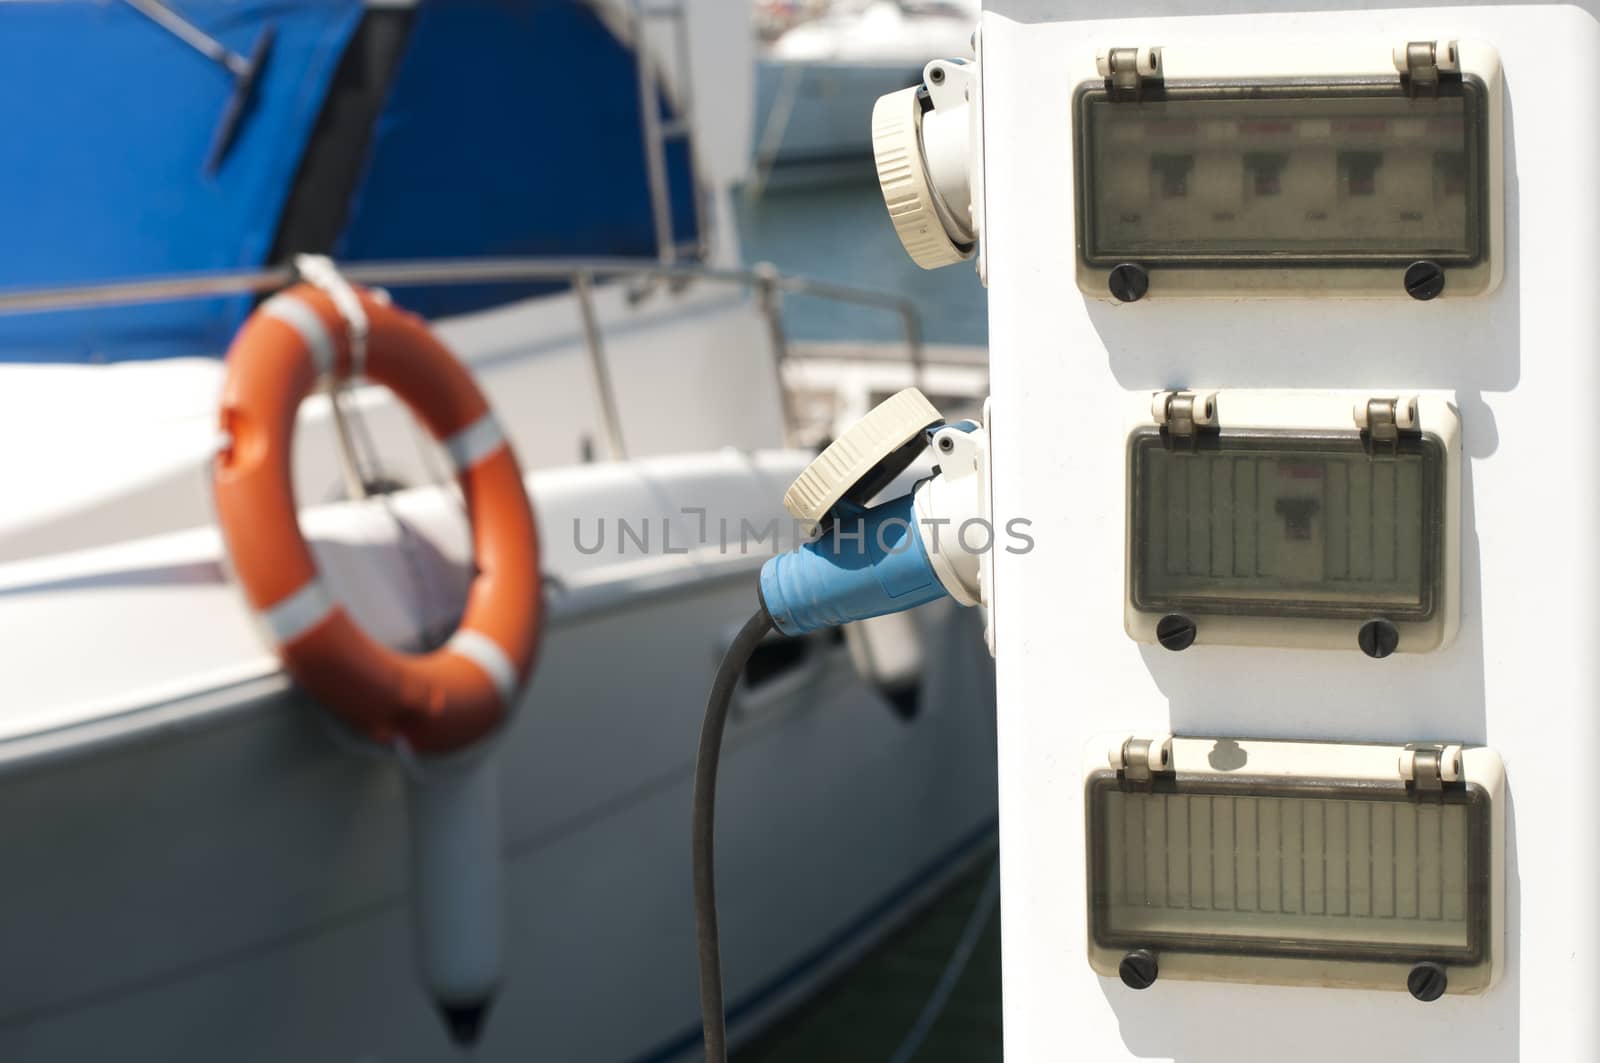 Power connector for ships and yachts. Marina